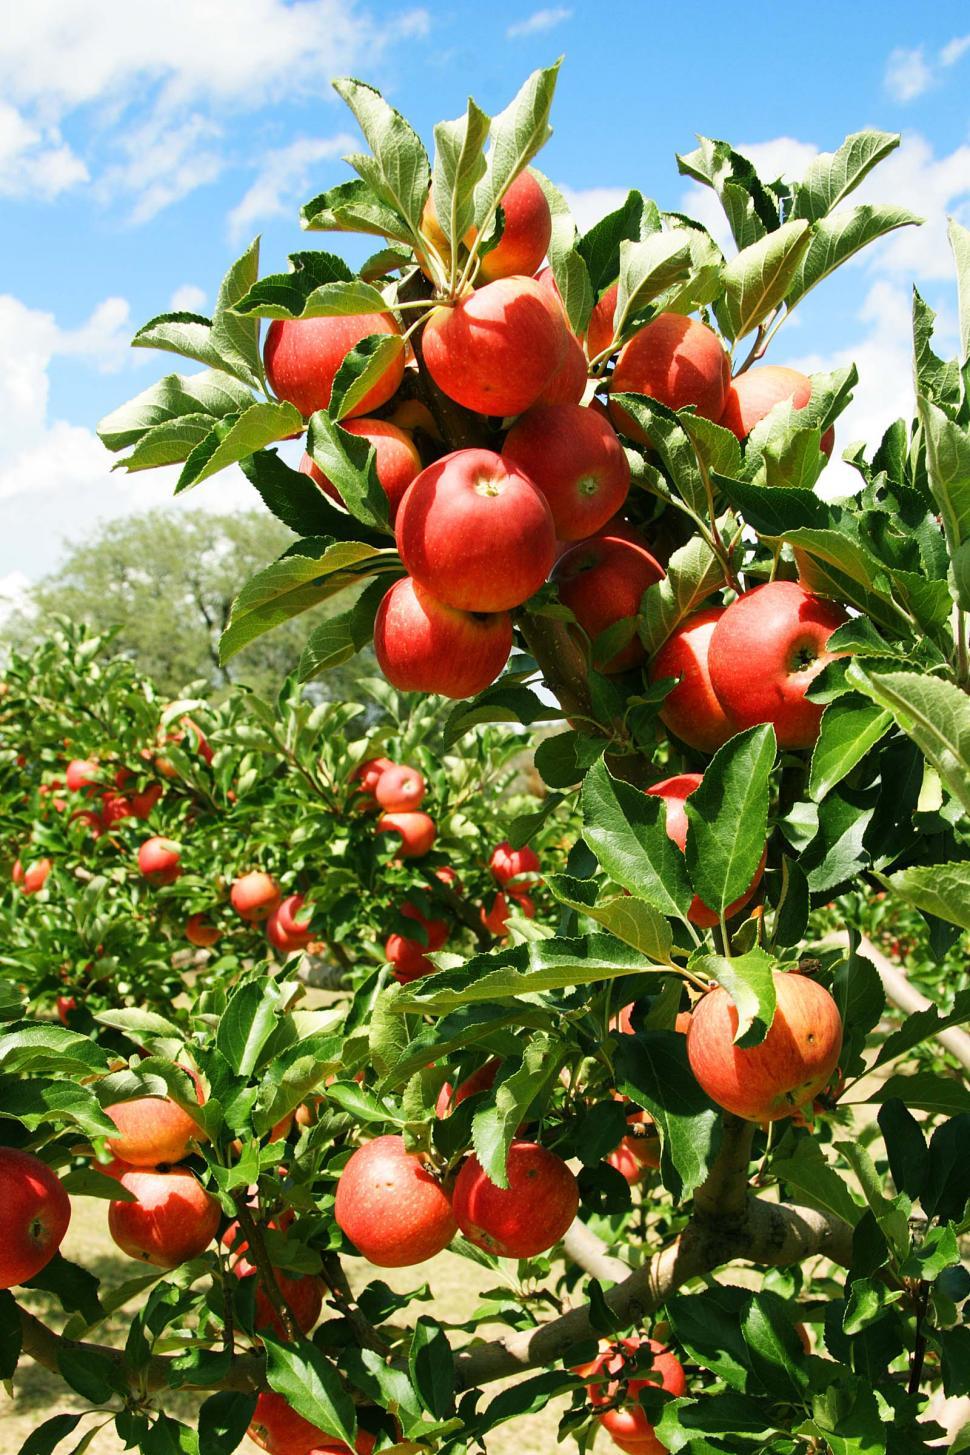 Free Image of Apples on the tree 